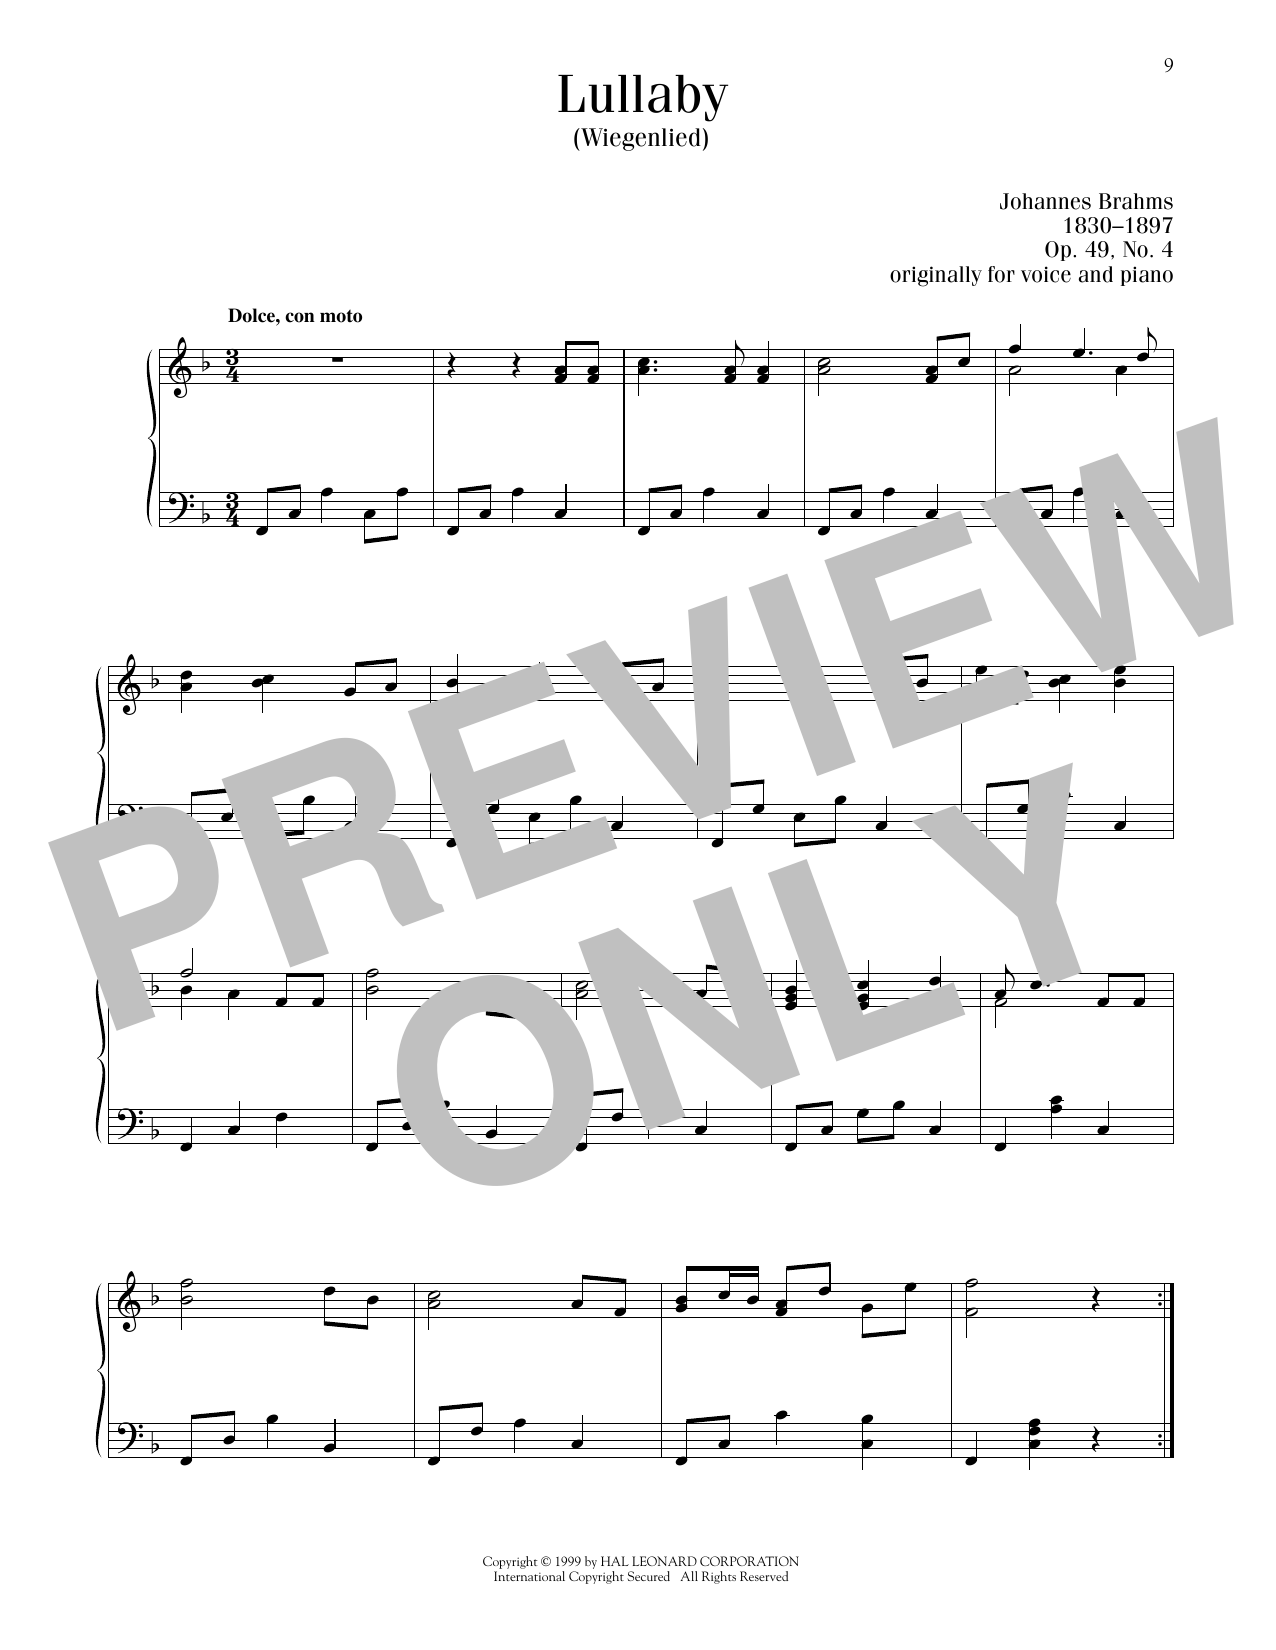 Johannes Brahms Lullaby (Cradle Song) sheet music notes printable PDF score